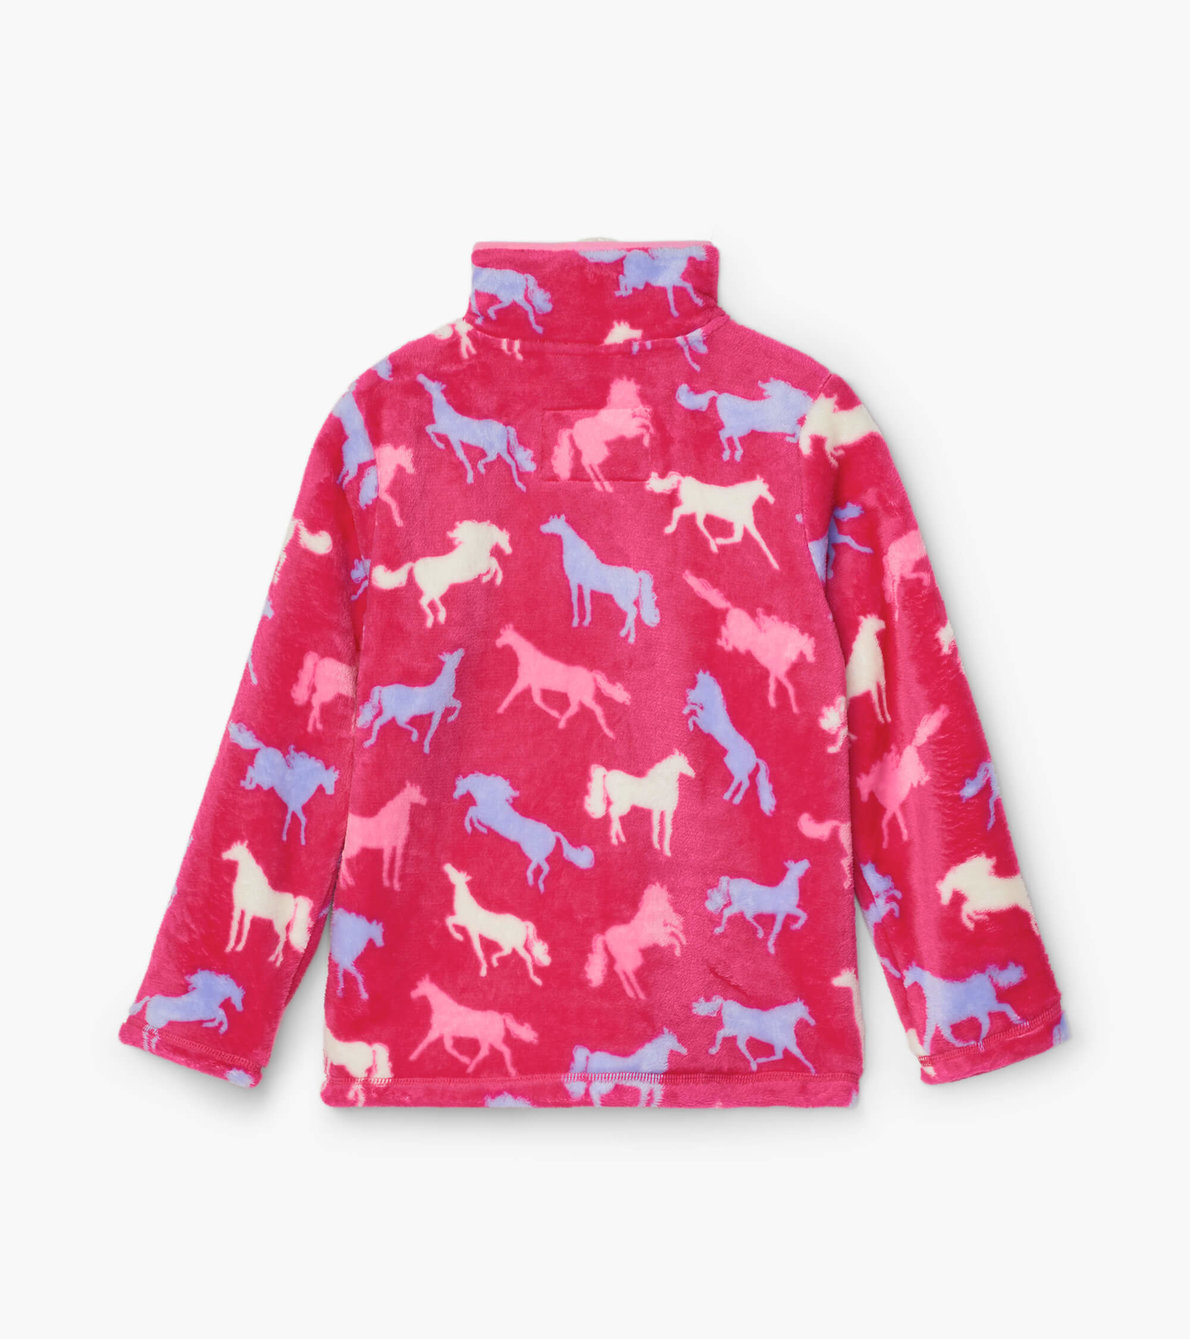 View larger image of Horse Silhouettes Fuzzy Fleece Zip Up